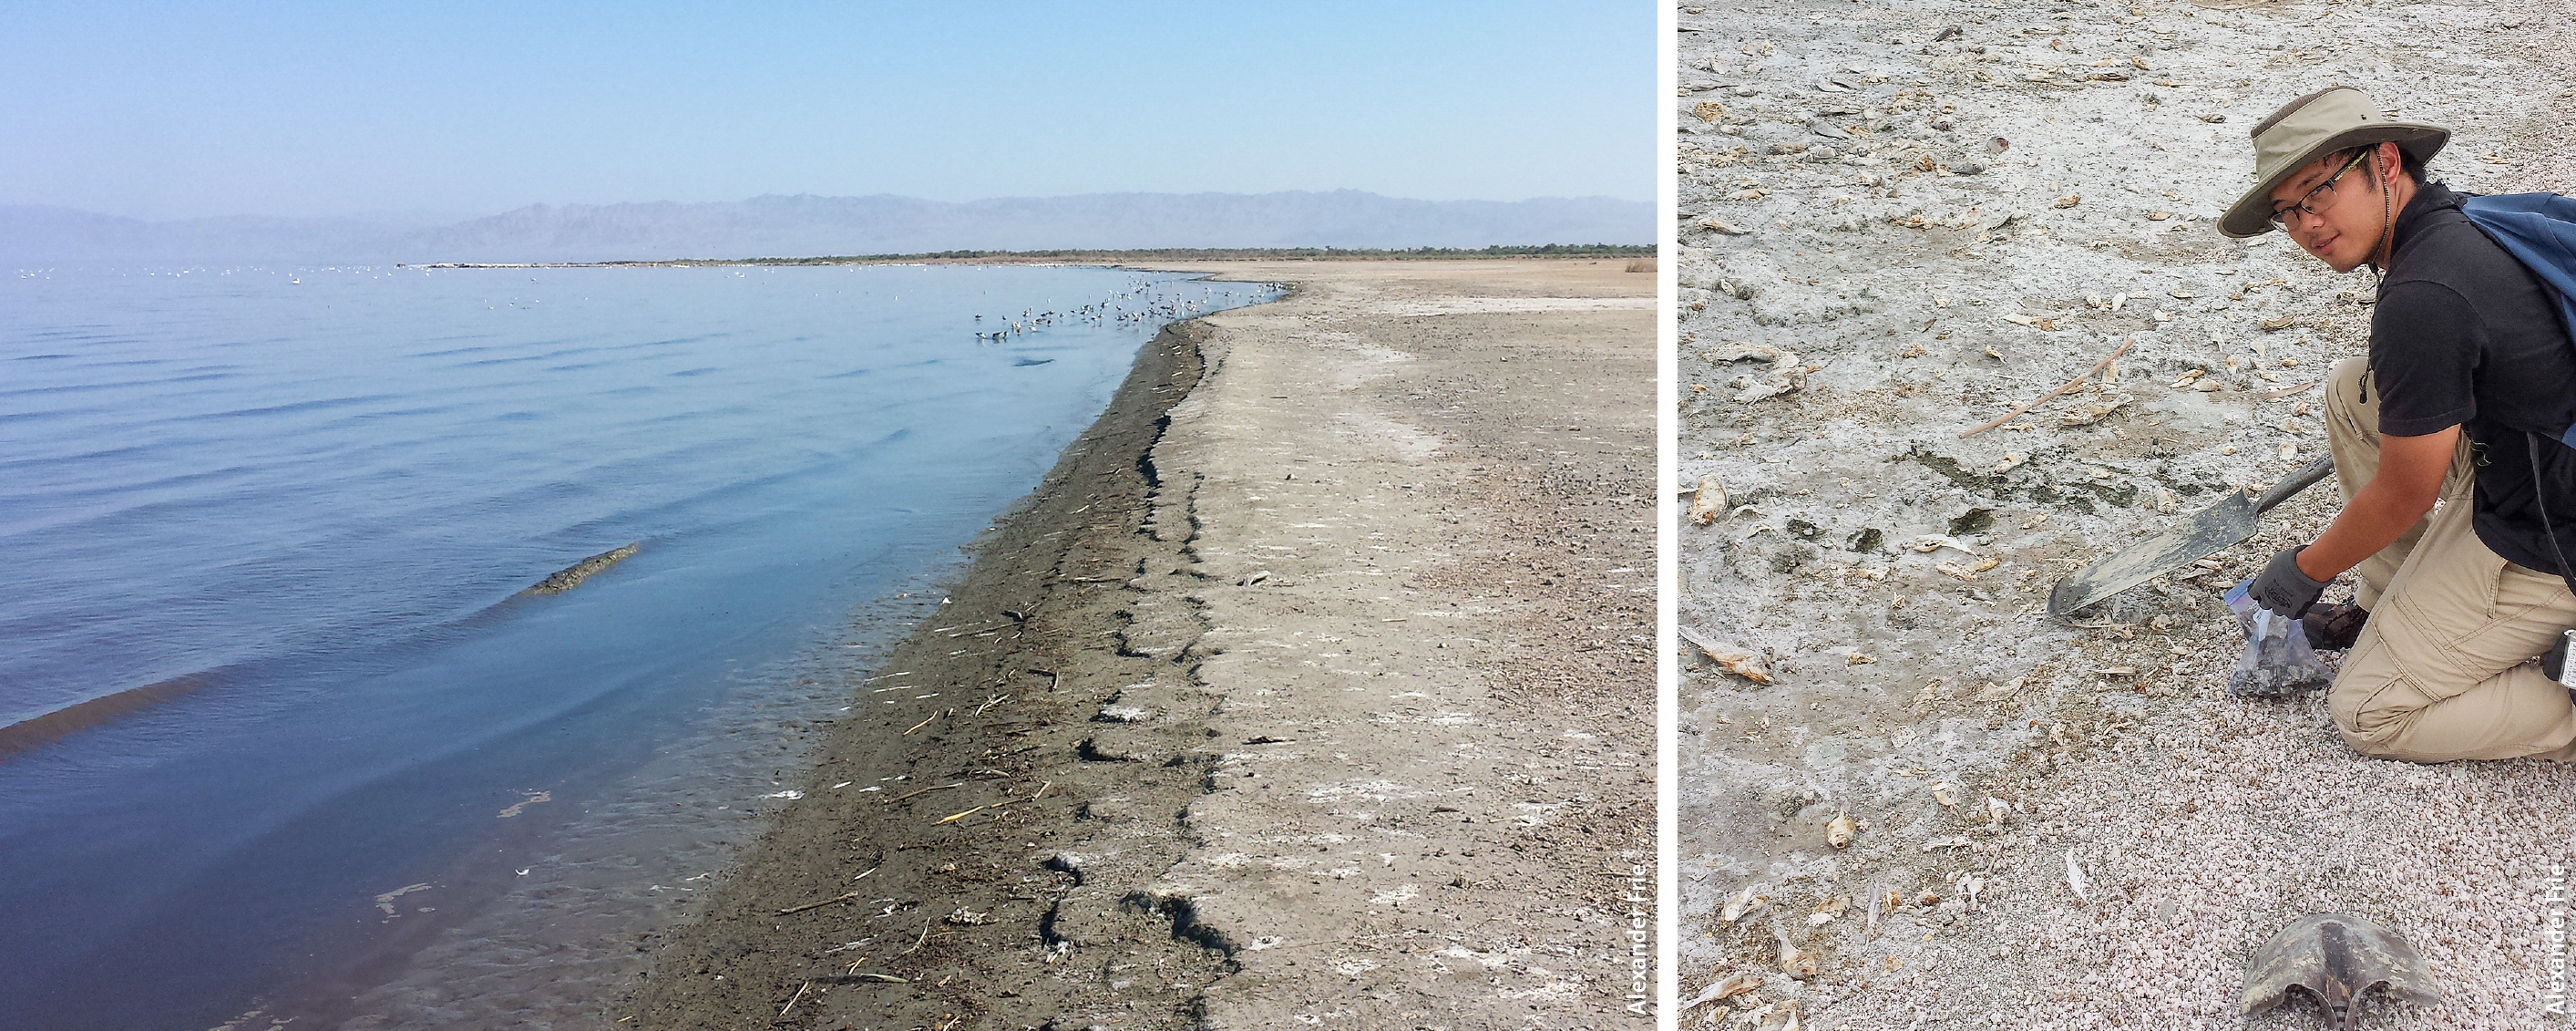 Left, The Salton Sea is shrinking, exposing more of its playa, which contains a number of chemicals of concern. Right, UC Riverside graduate student Justin Dingle collects playa samples for source chemical characterization.